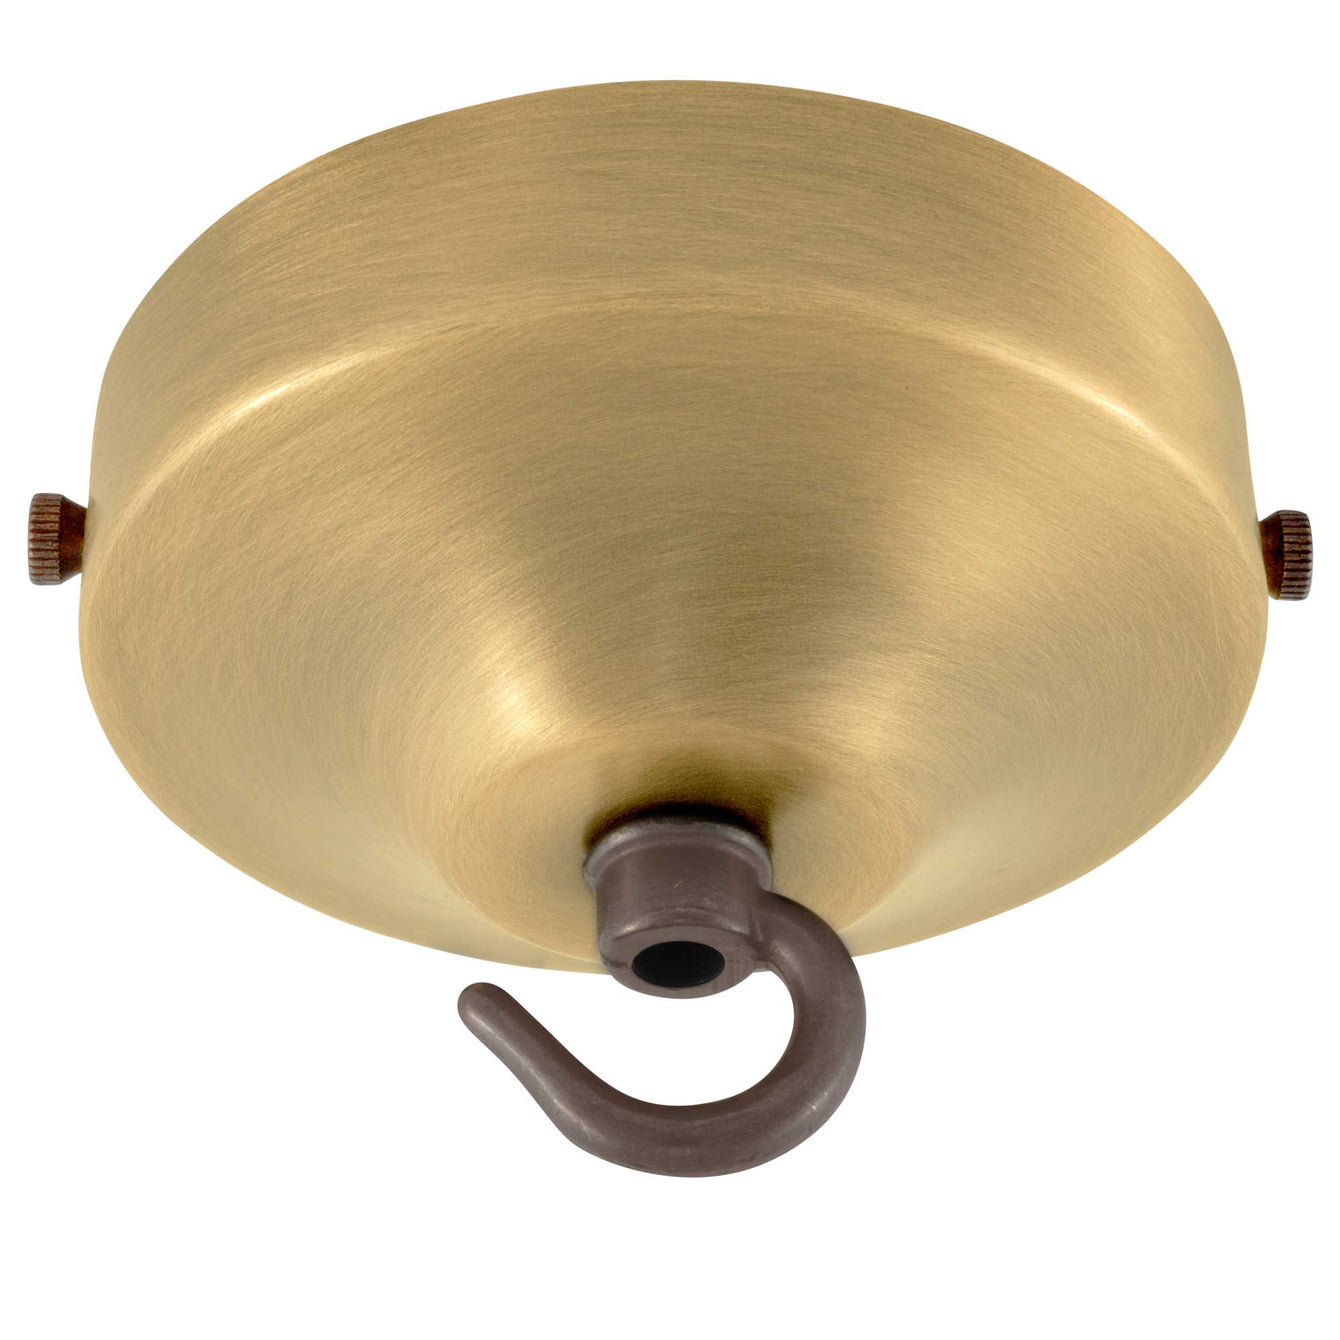 ElekTek 100mm Diameter Convex Ceiling Rose with Strap Bracket and Hook Metallic and Powder Coated Finishes Fusion Bronze